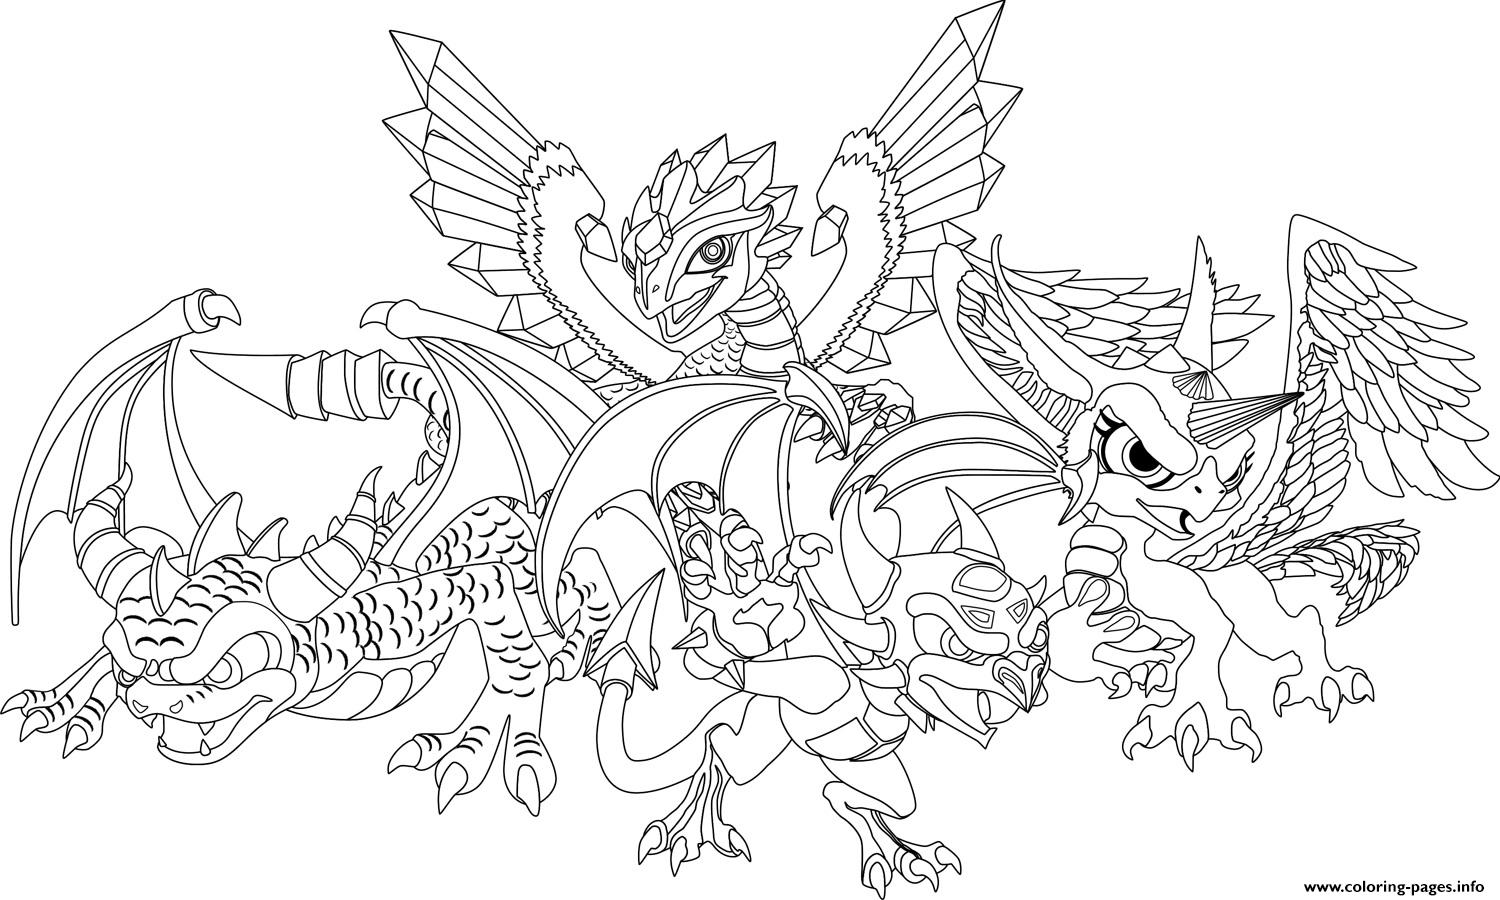 Animal Dragon City Coloring Pages for Kids